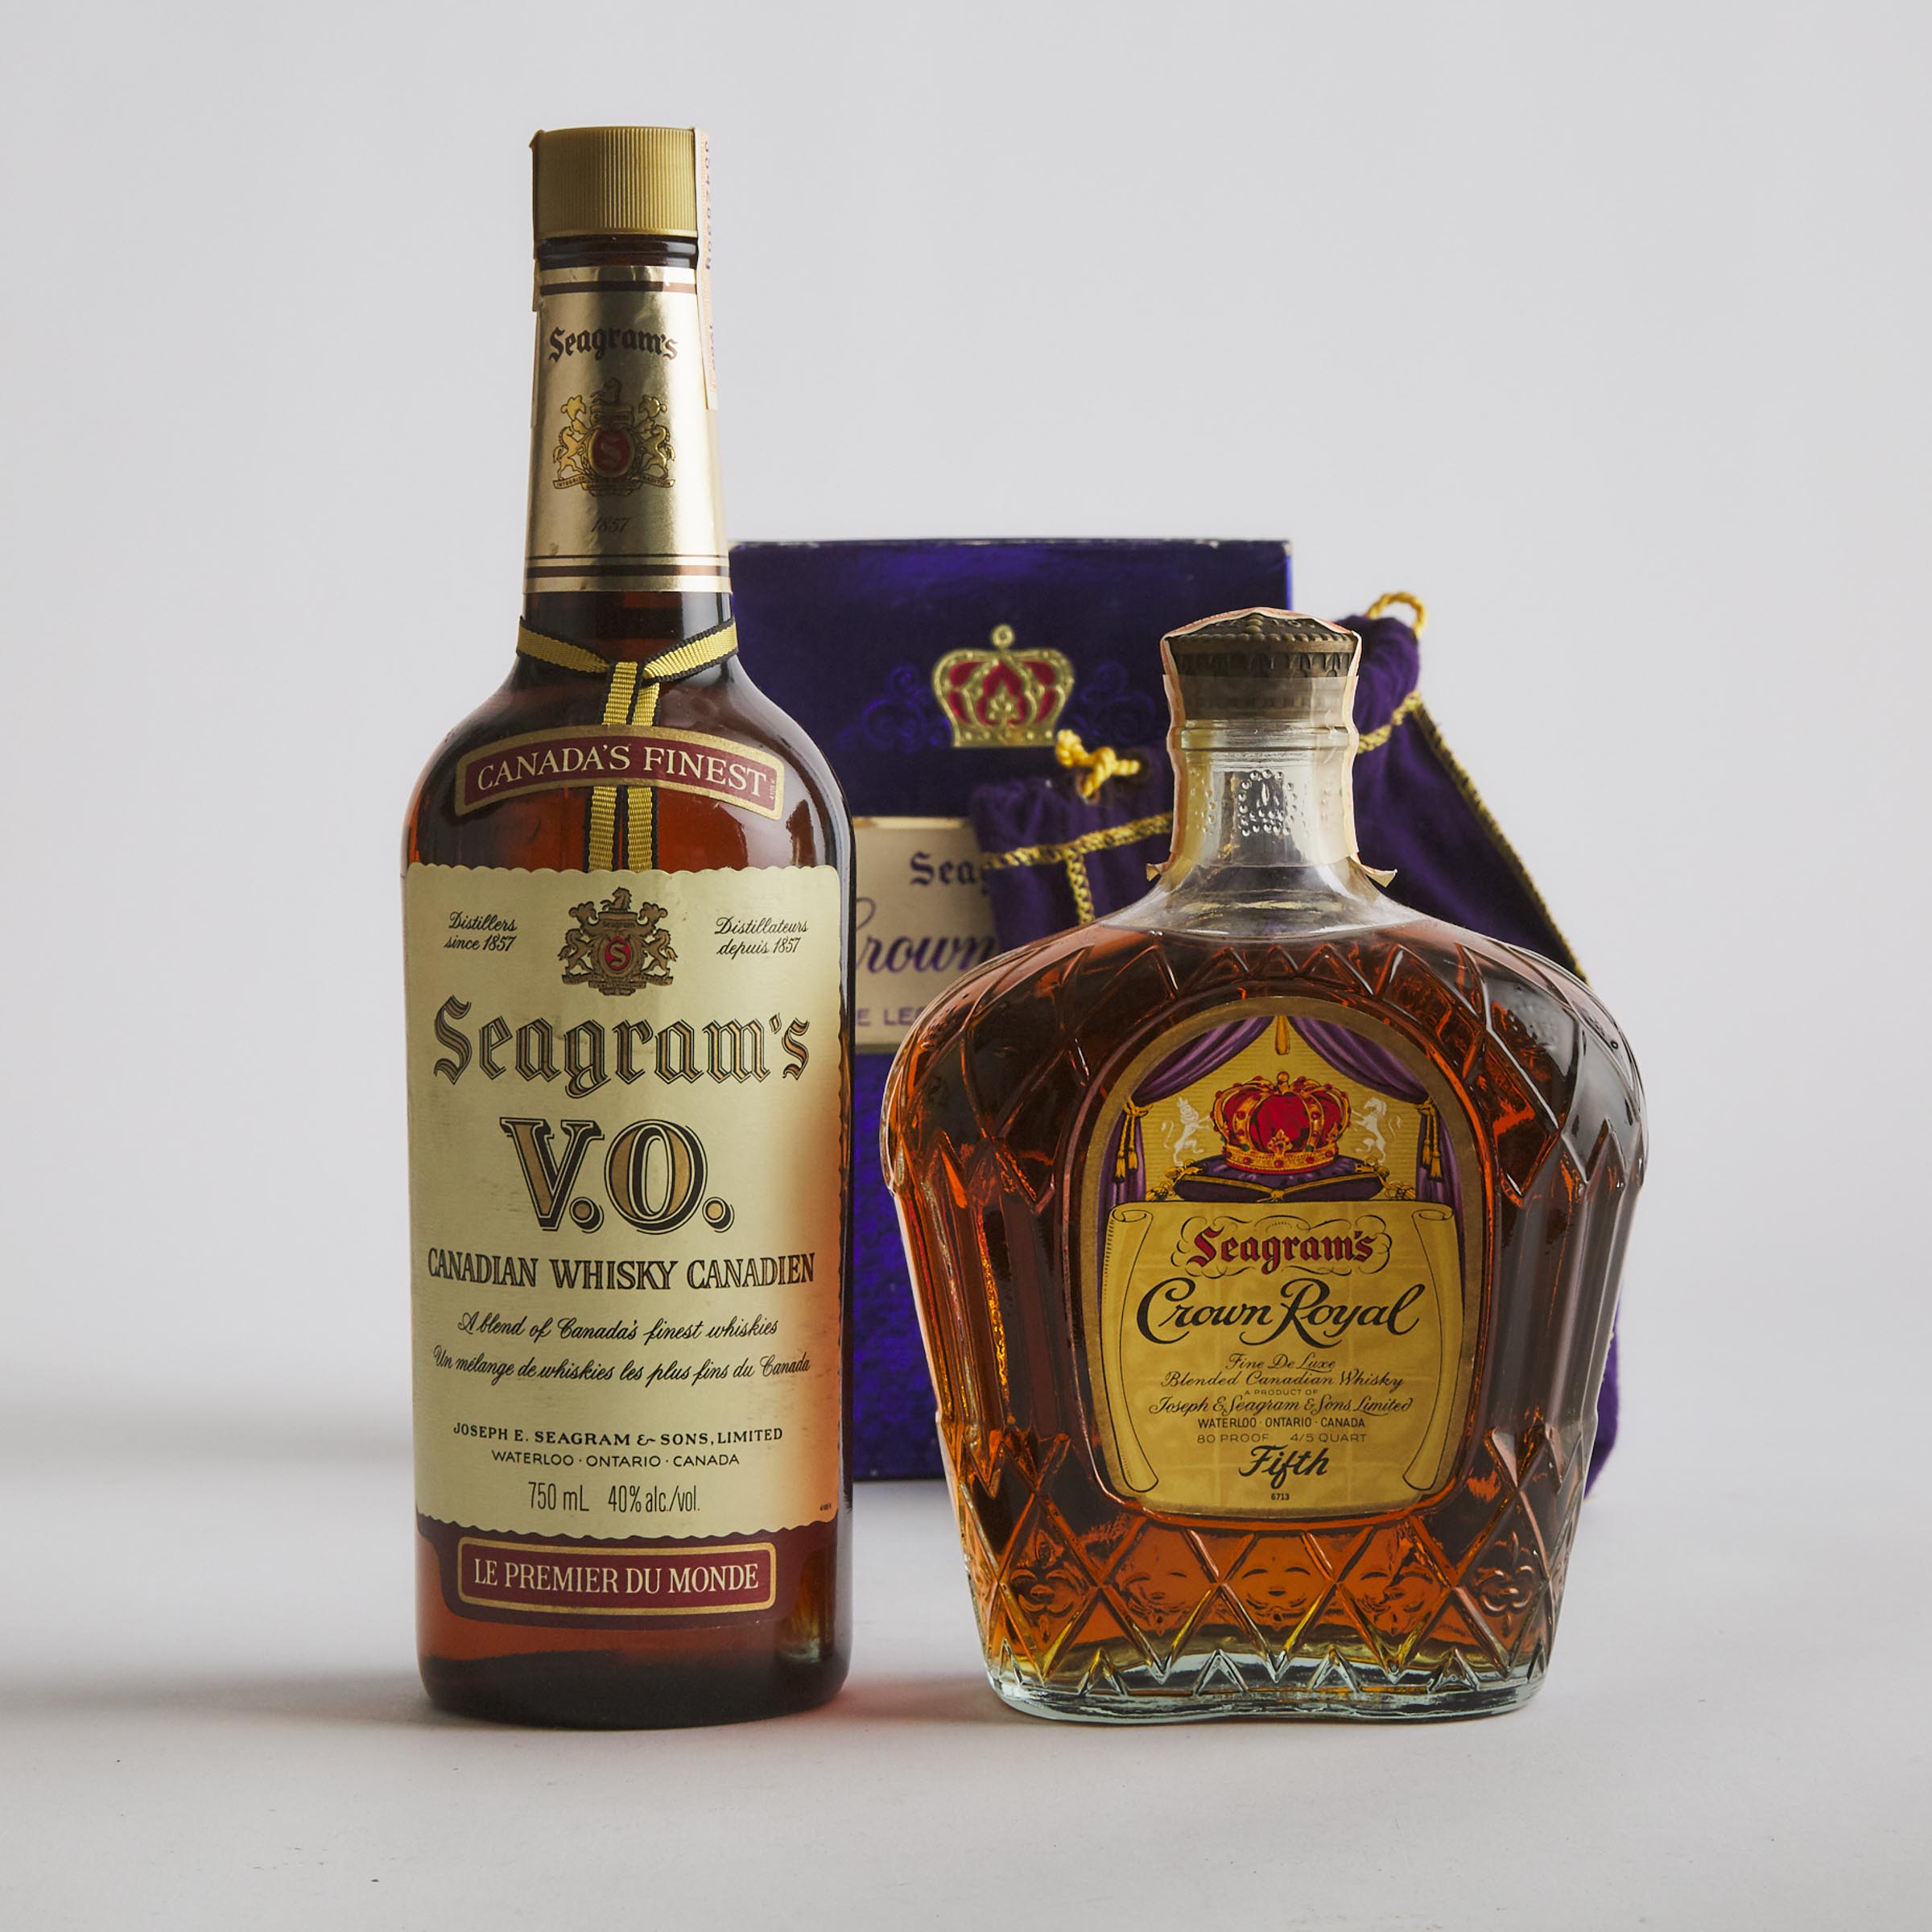 CROWN ROYAL FINE DELUXE CANADIAN WHISKY (ONE 4/5 QUART)
SEAGRAM'S VO BLENDED CANADIAN WHISKY (ONE 750 ML)